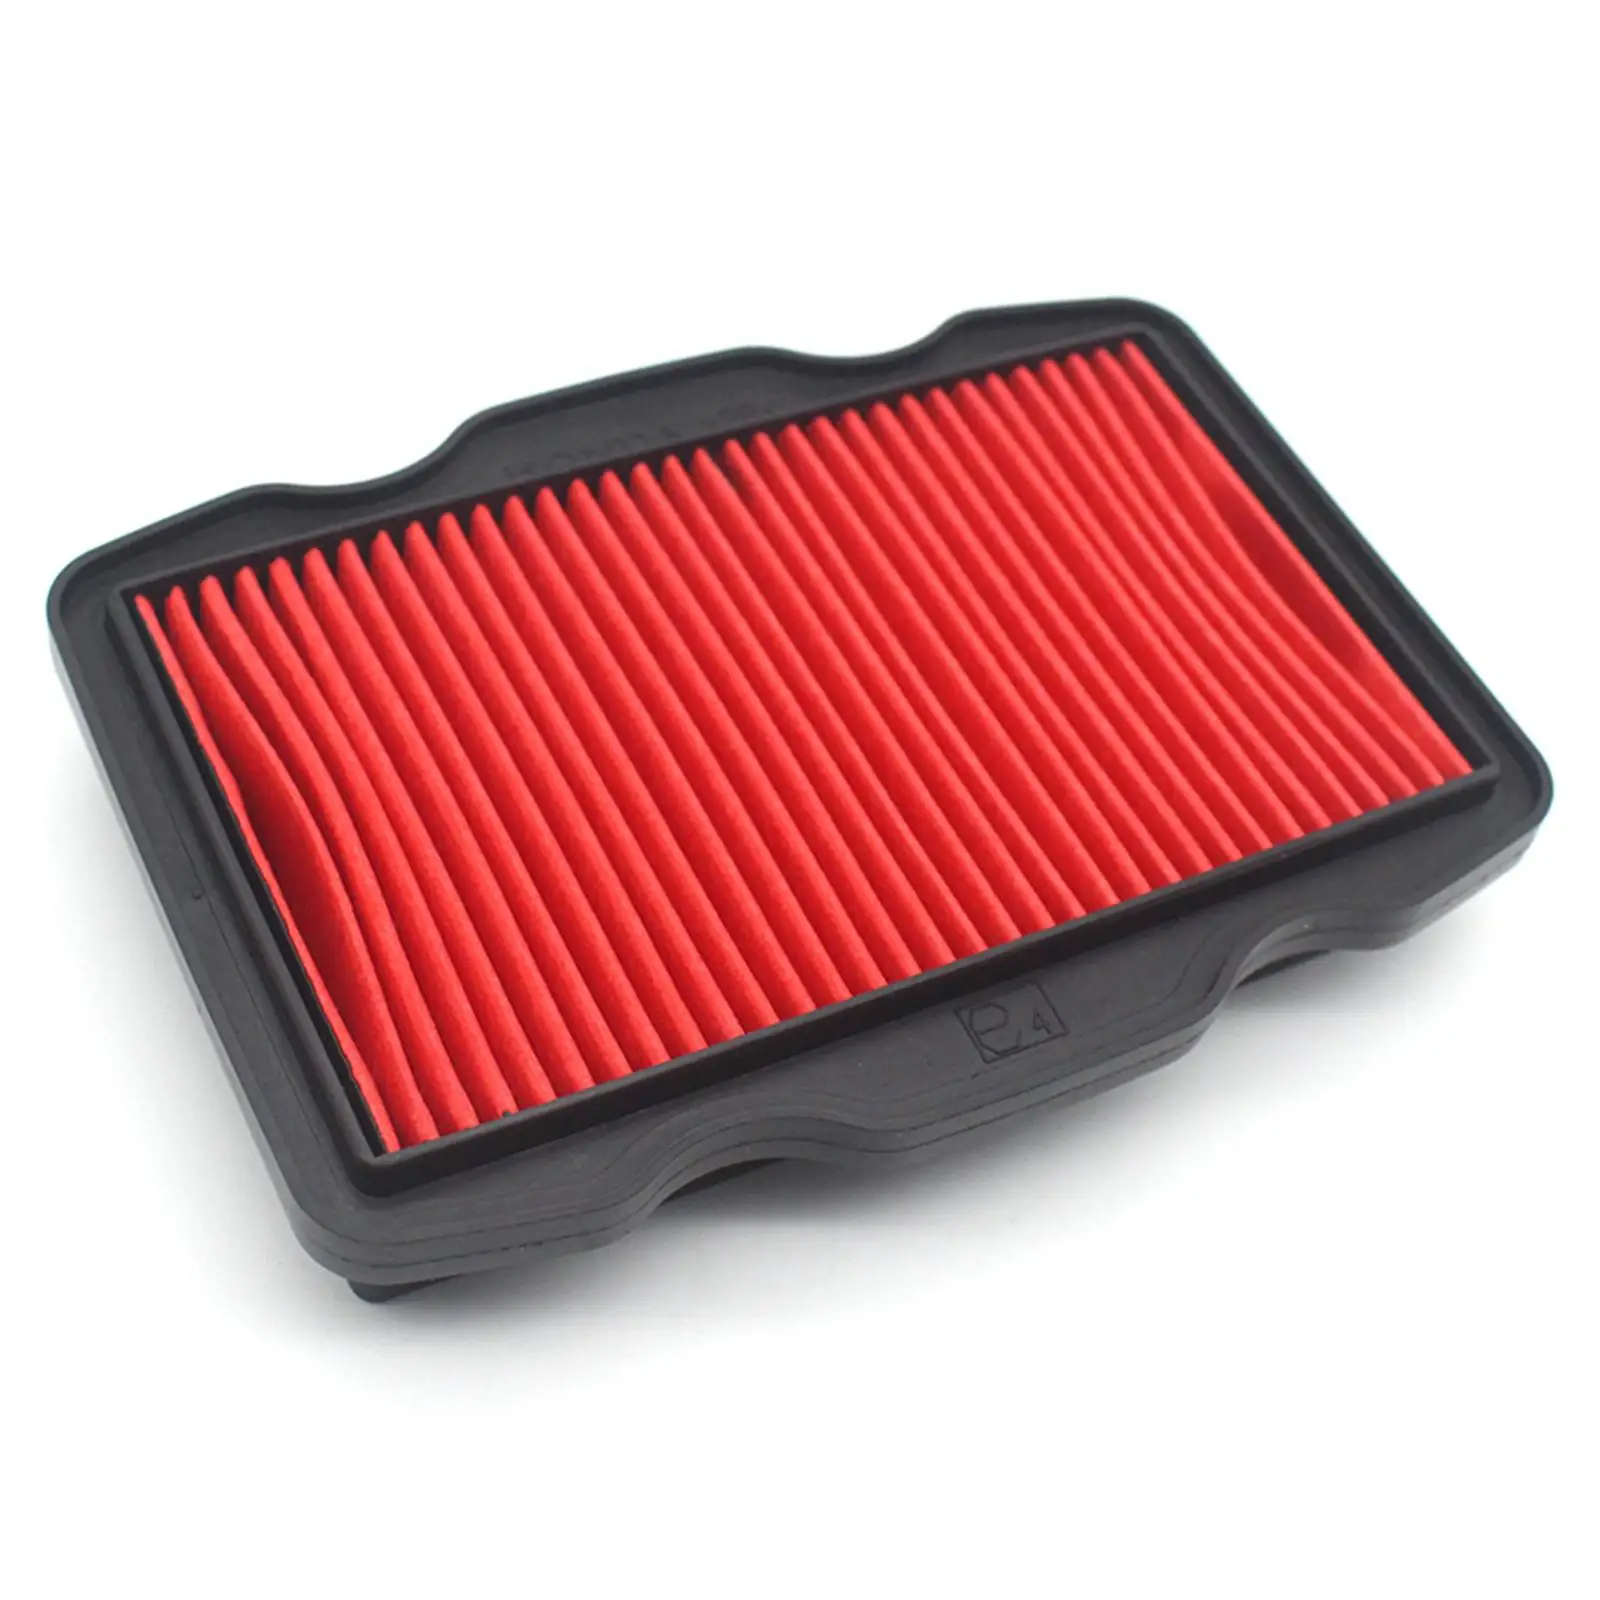 1pc Motorcycle Parts Air Filter Sponge Red for  5F GLR125 2015, Easy to Replace